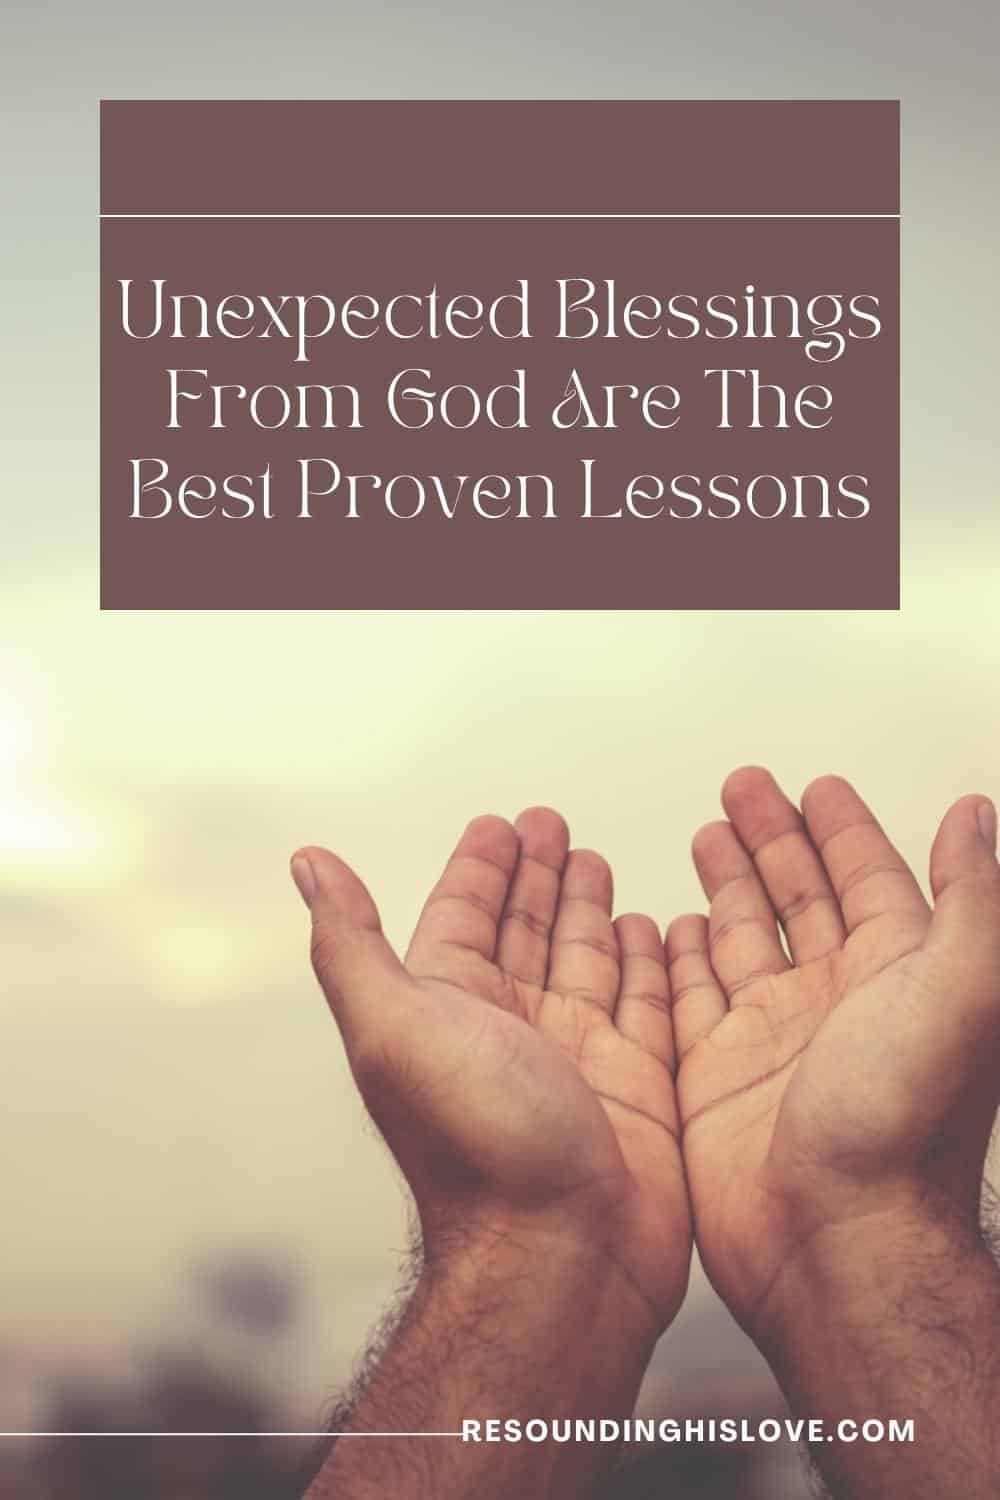 Unexpected Blessings From God Are The Best Proven Lessons